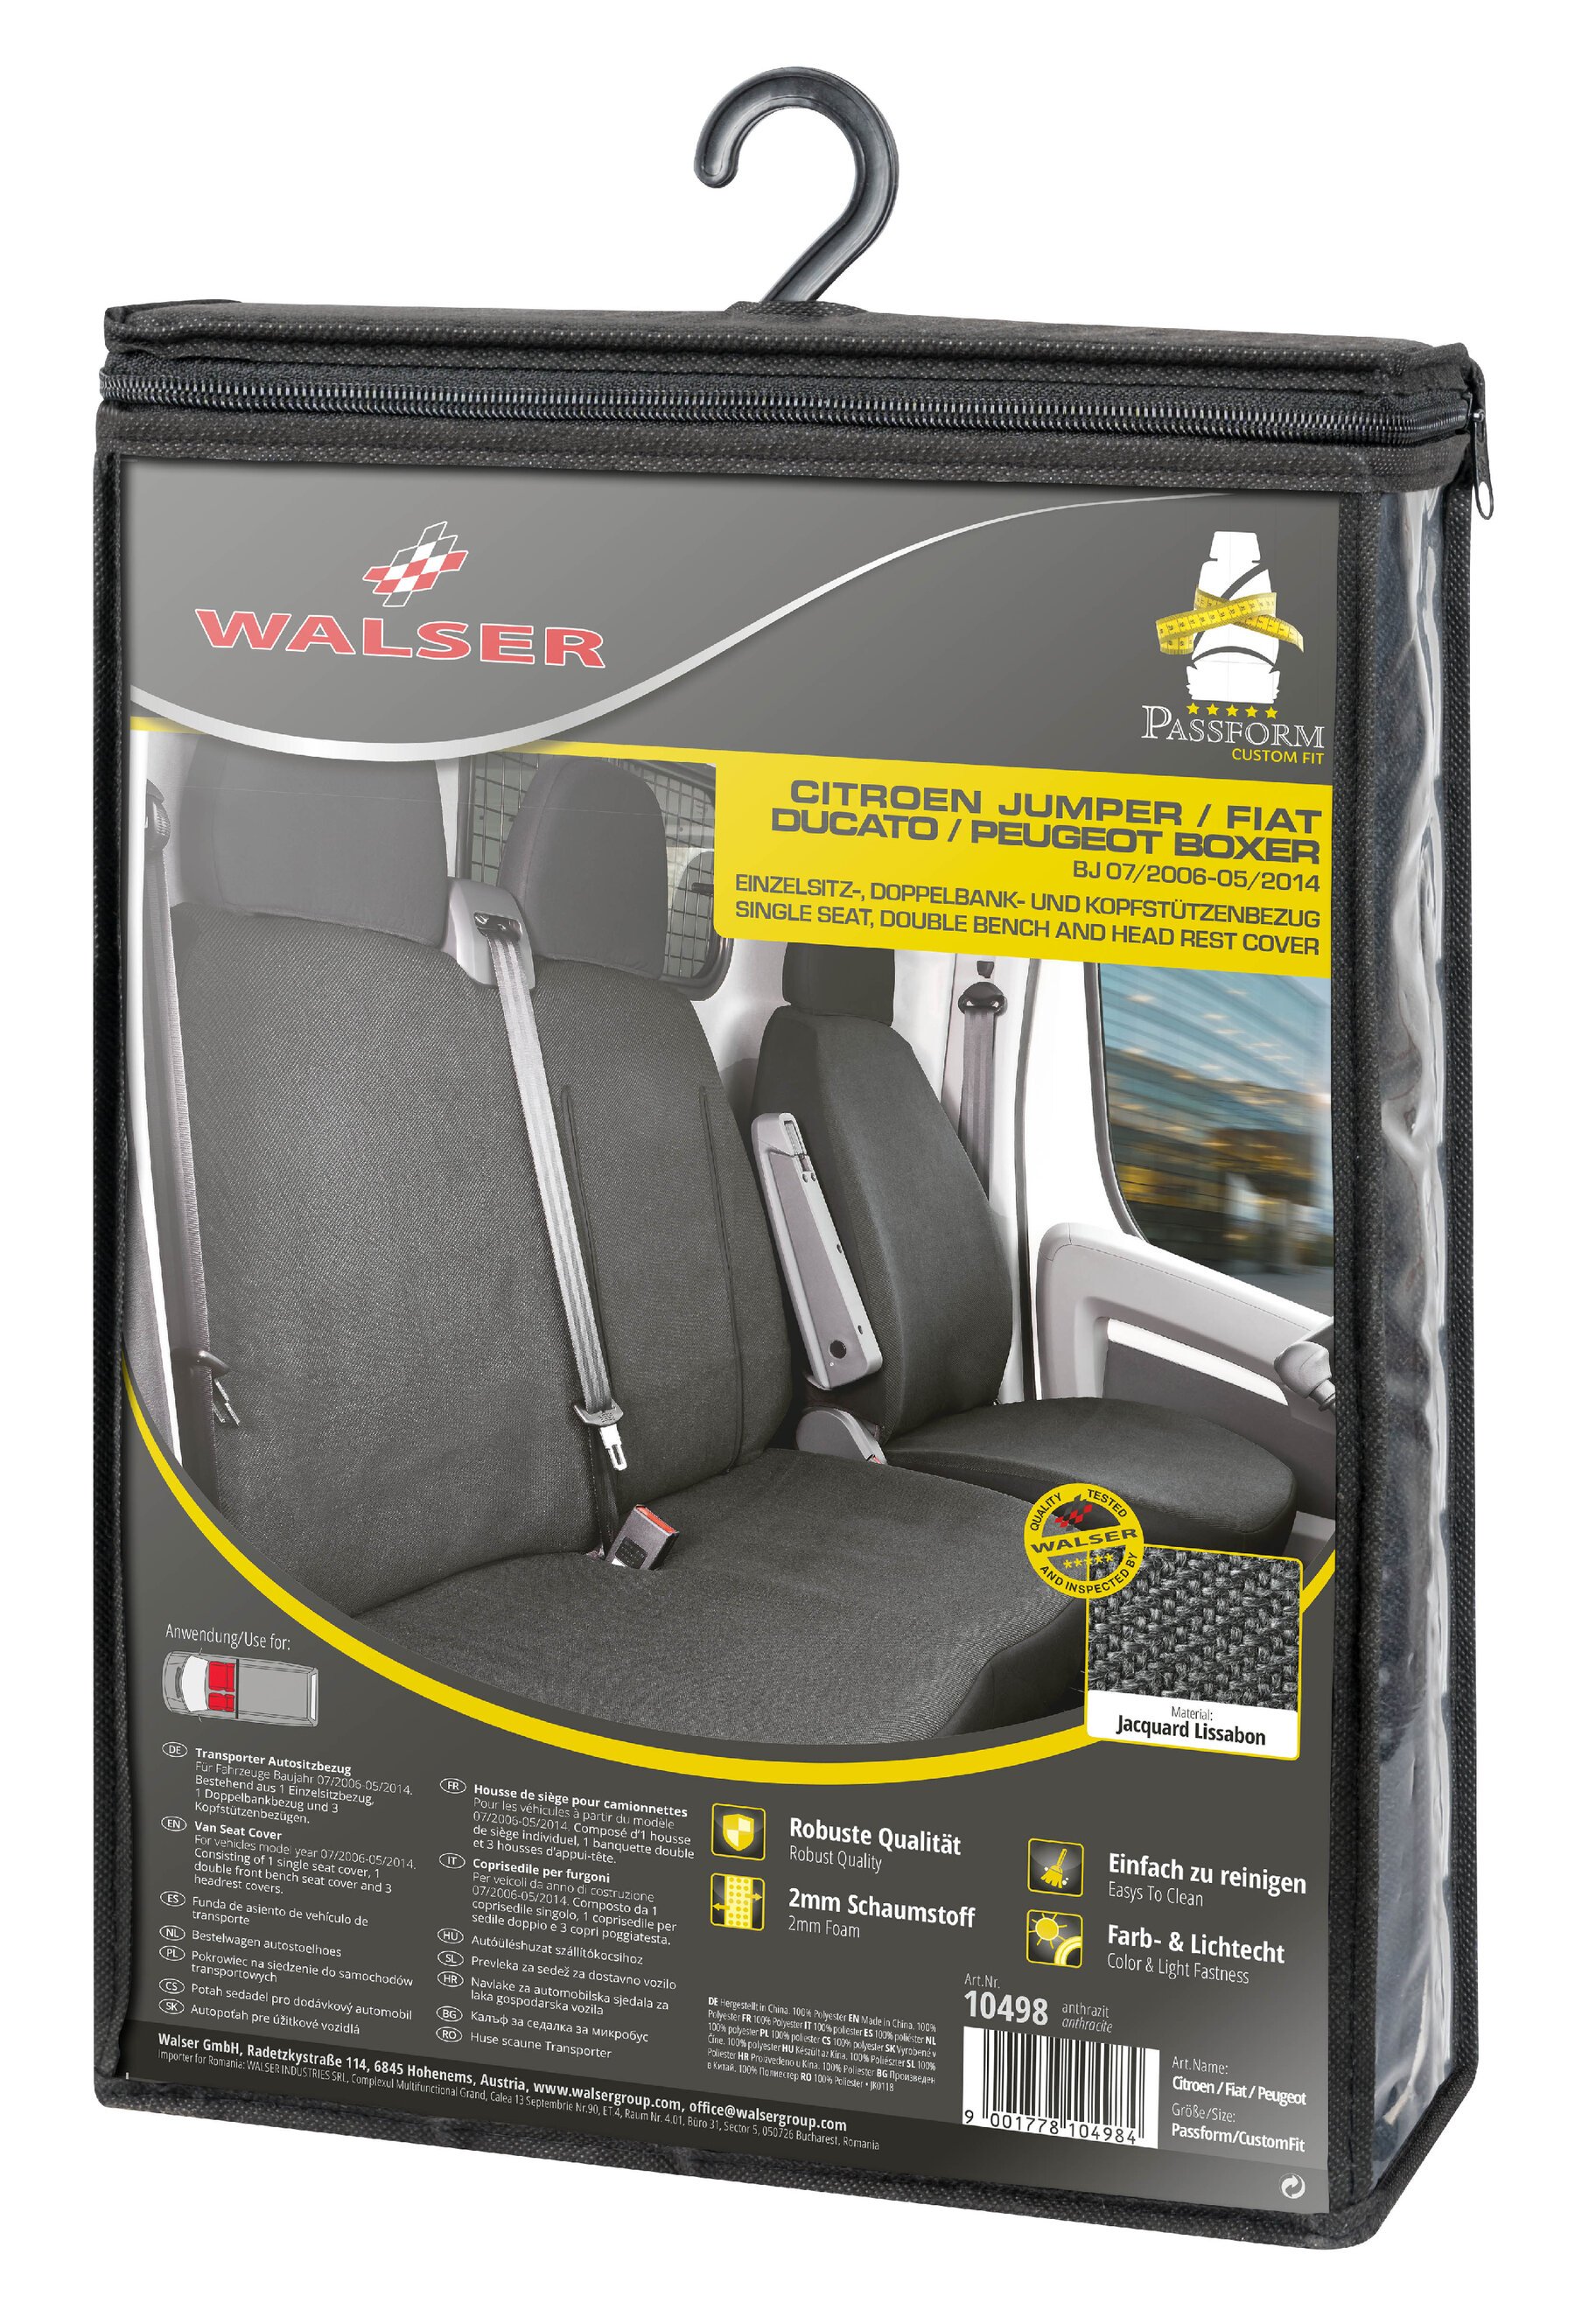 Car Seat cover Transporter made of fabric for Citroen Jumper, Fiat Ducato, Peugeot Boxer, single & double seat